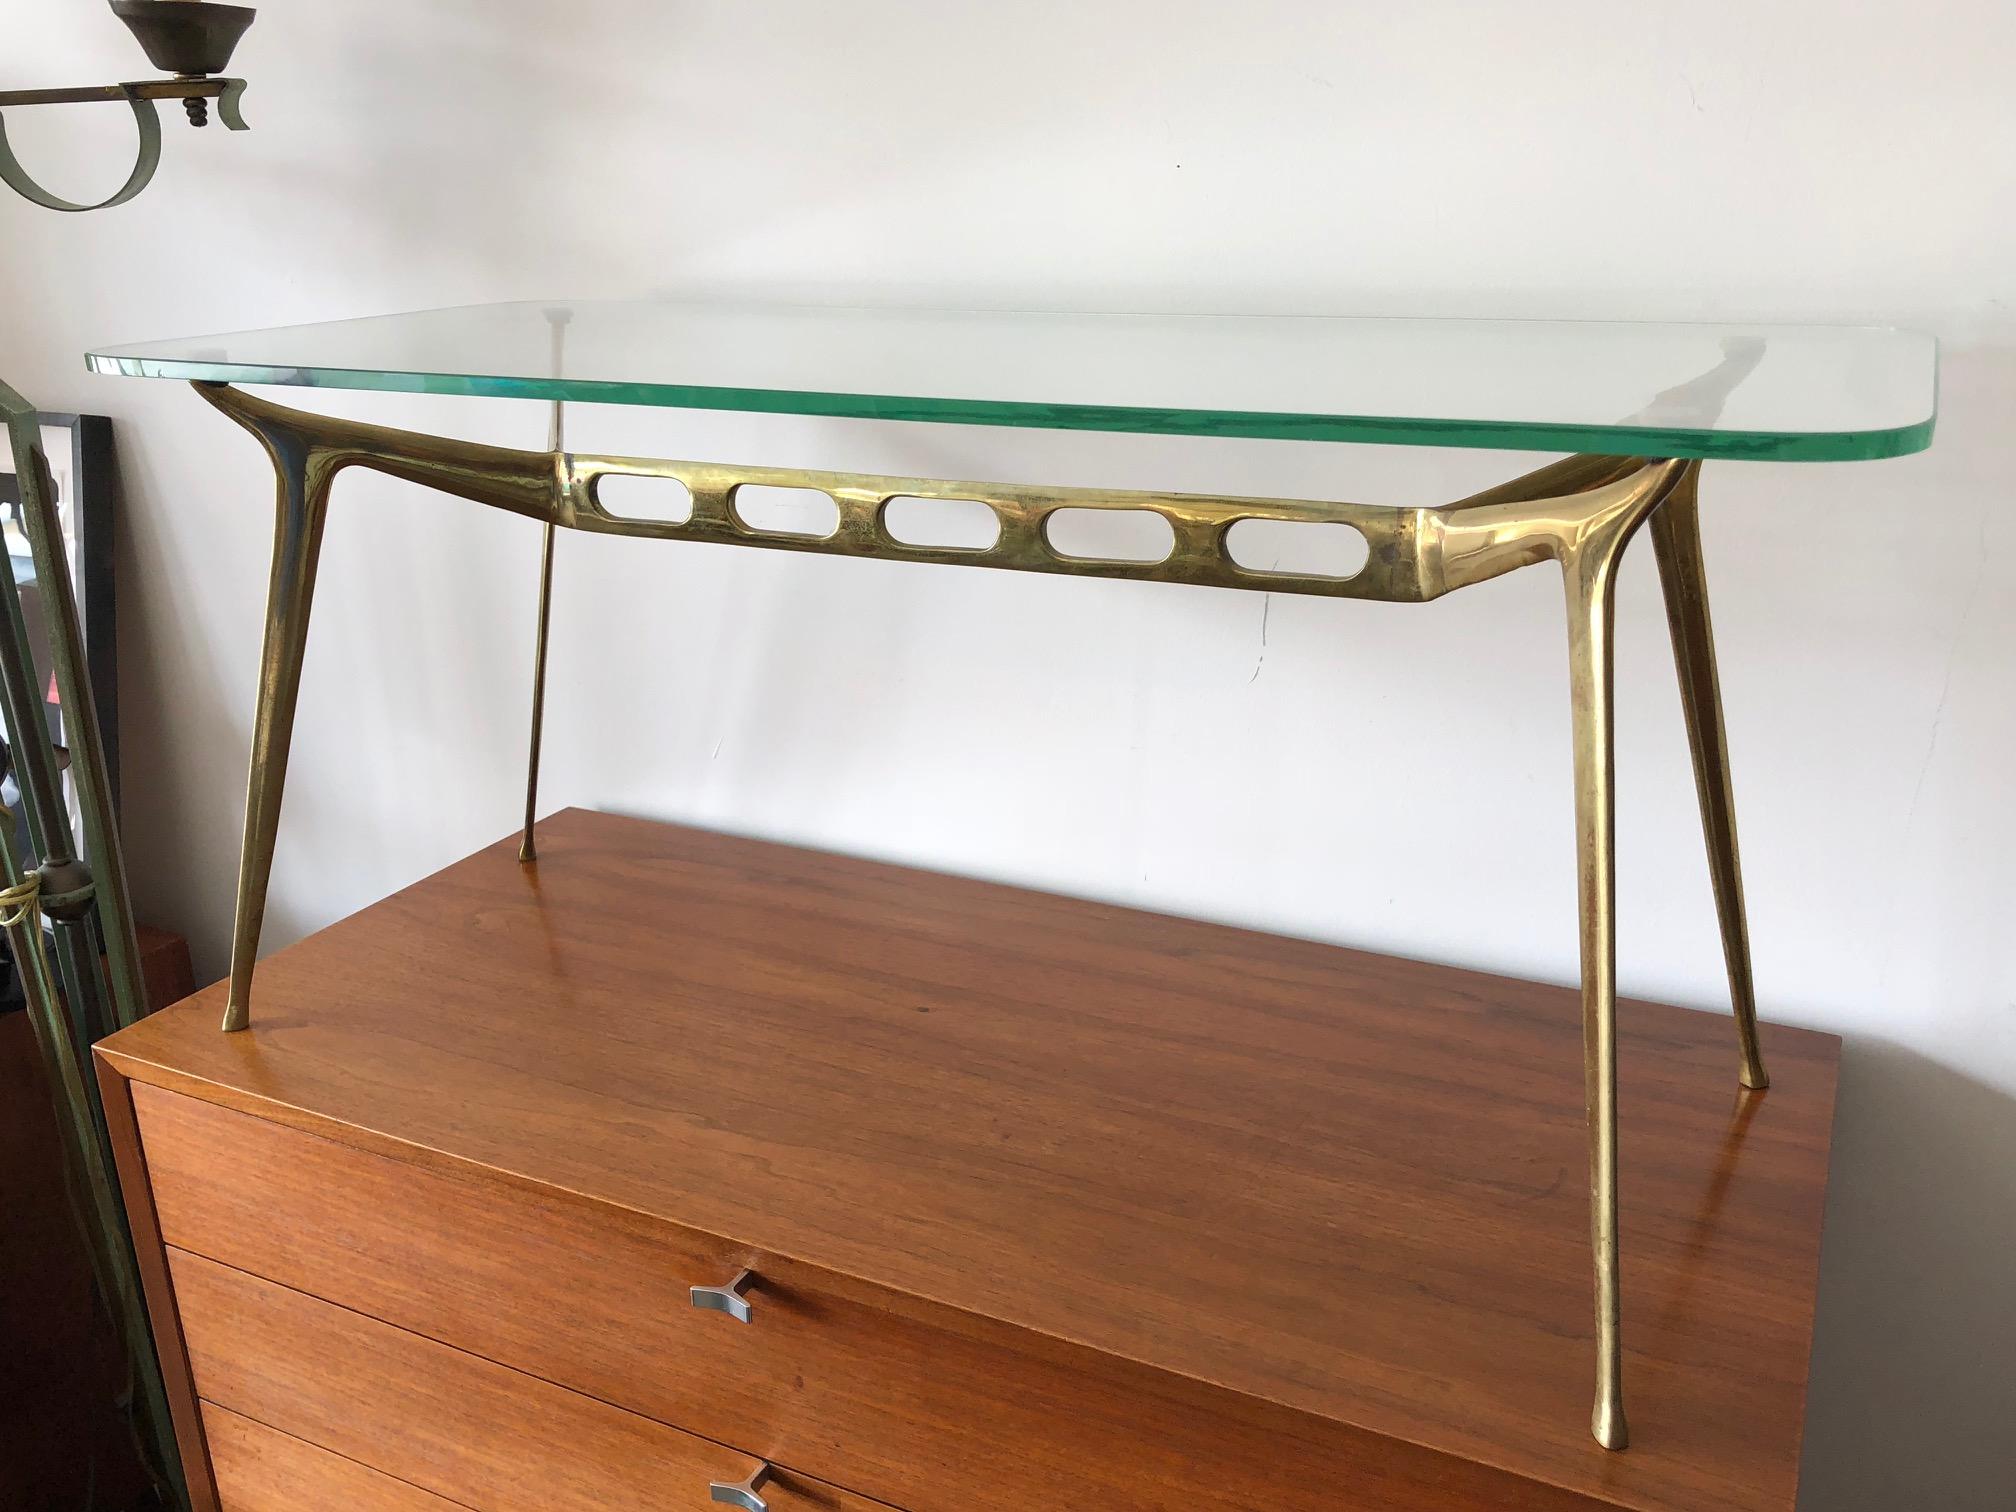 An elegant Cesare Lacca brass coffee table. Sculpted brass base with cutouts, original green tinted glass. Classic Italian 1950s style that fits in any decor and setting. This is a great example and rare to find.